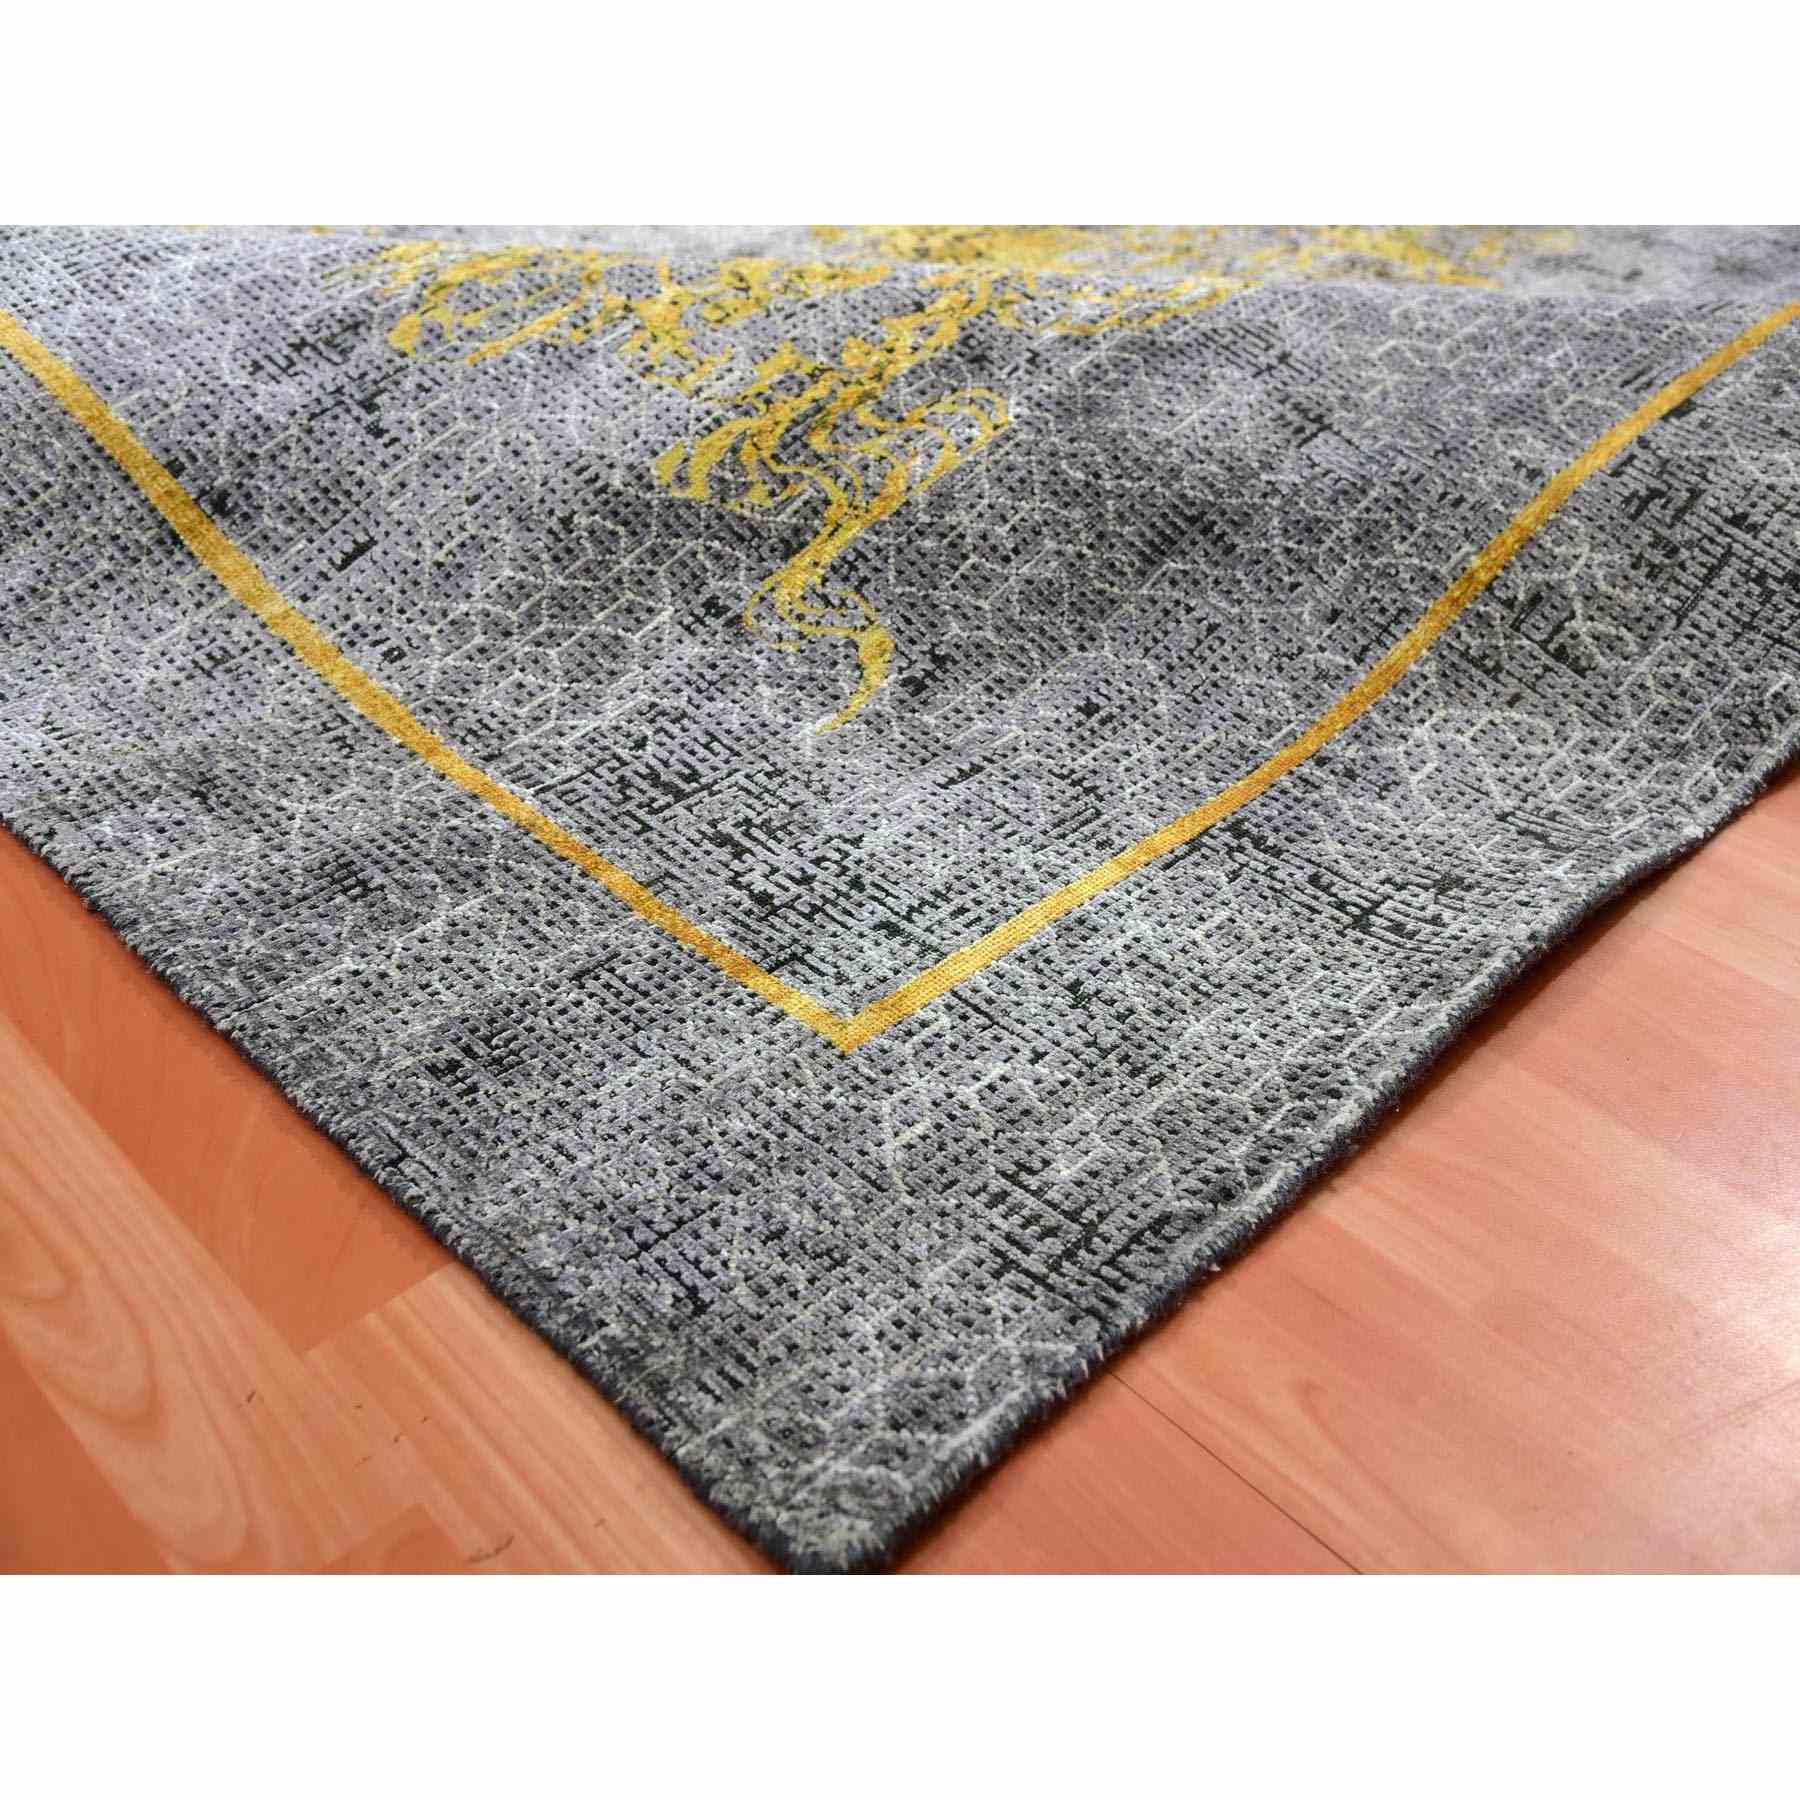 Fine-Oriental-Hand-Knotted-Rug-376575